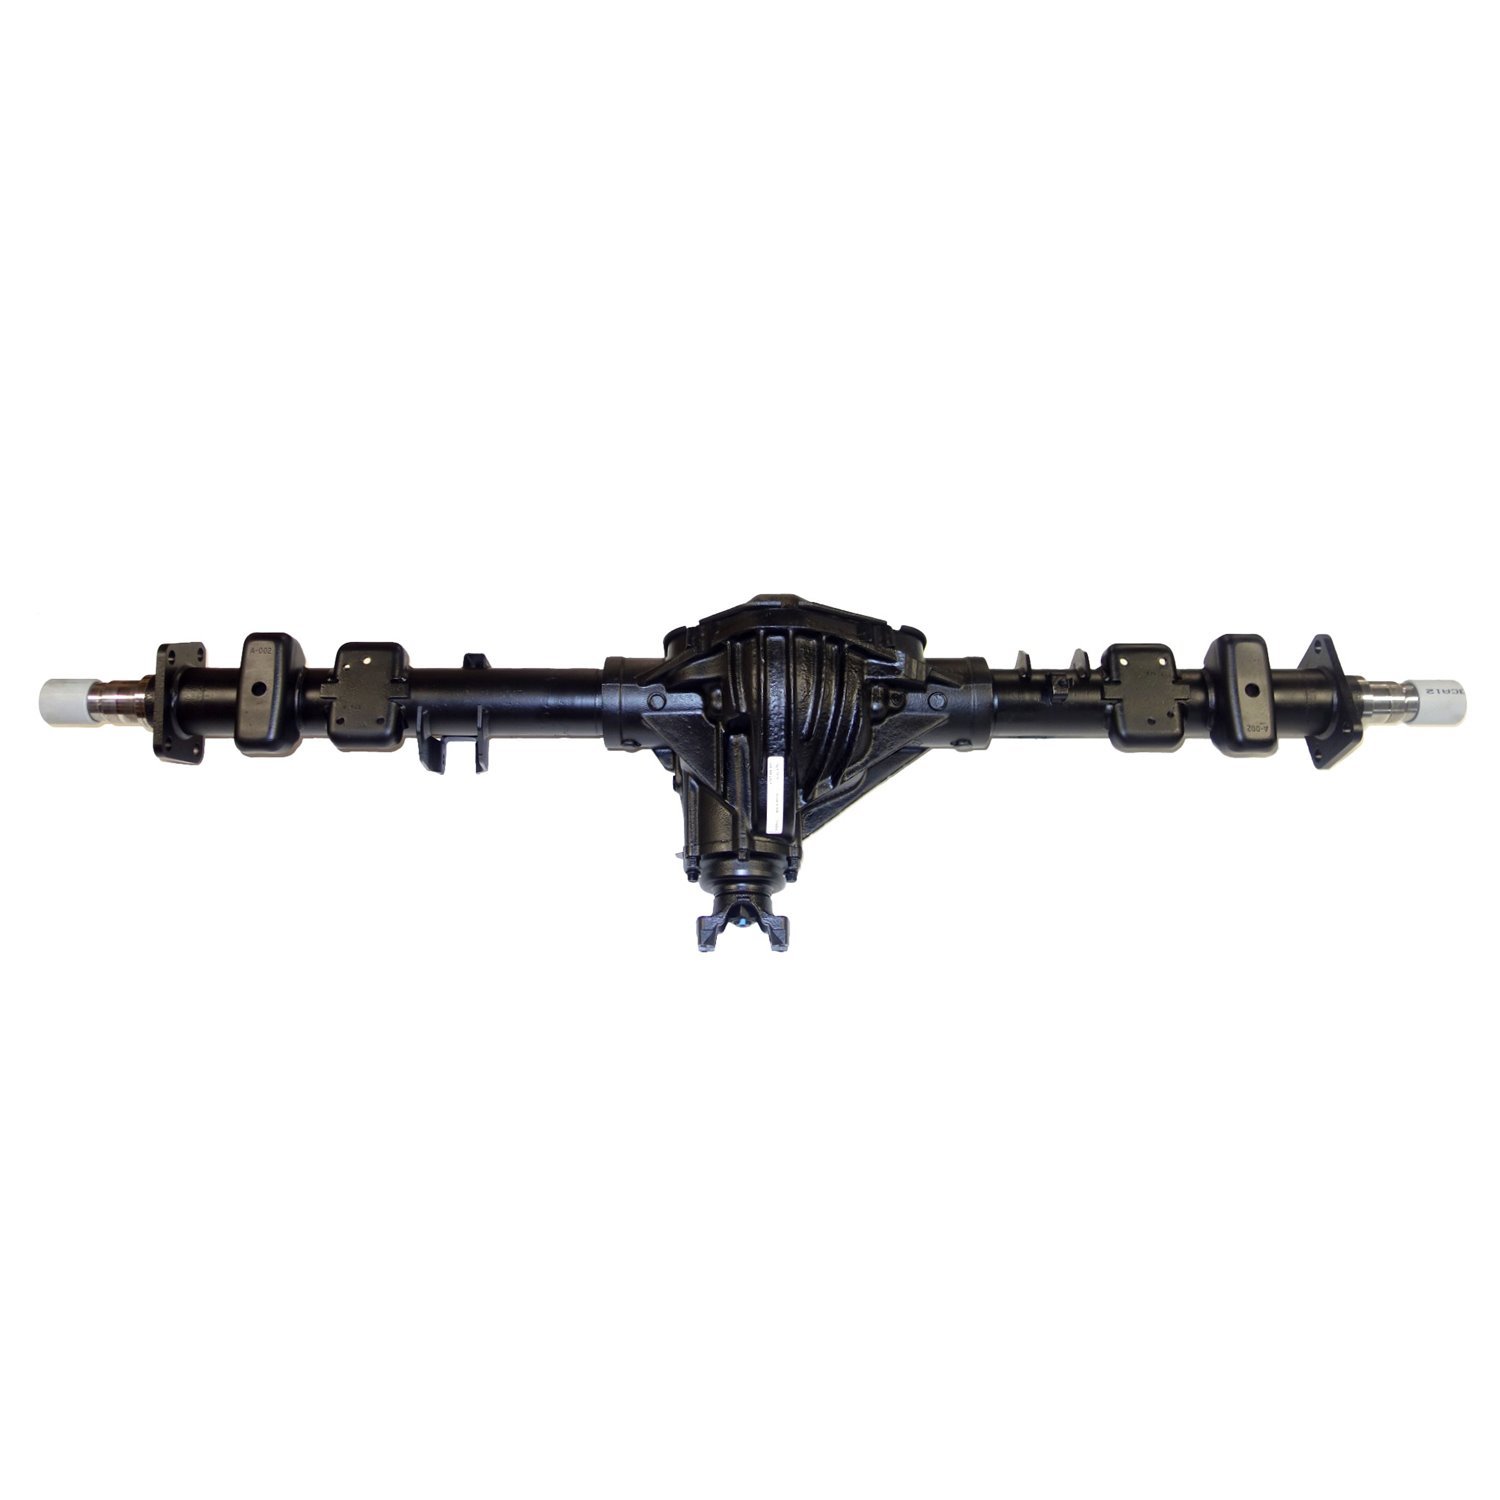 Remanufactured Complete Axle Assembly for GM 14 Bolt Truck 01-05 GM 2500 4.11 Ratio